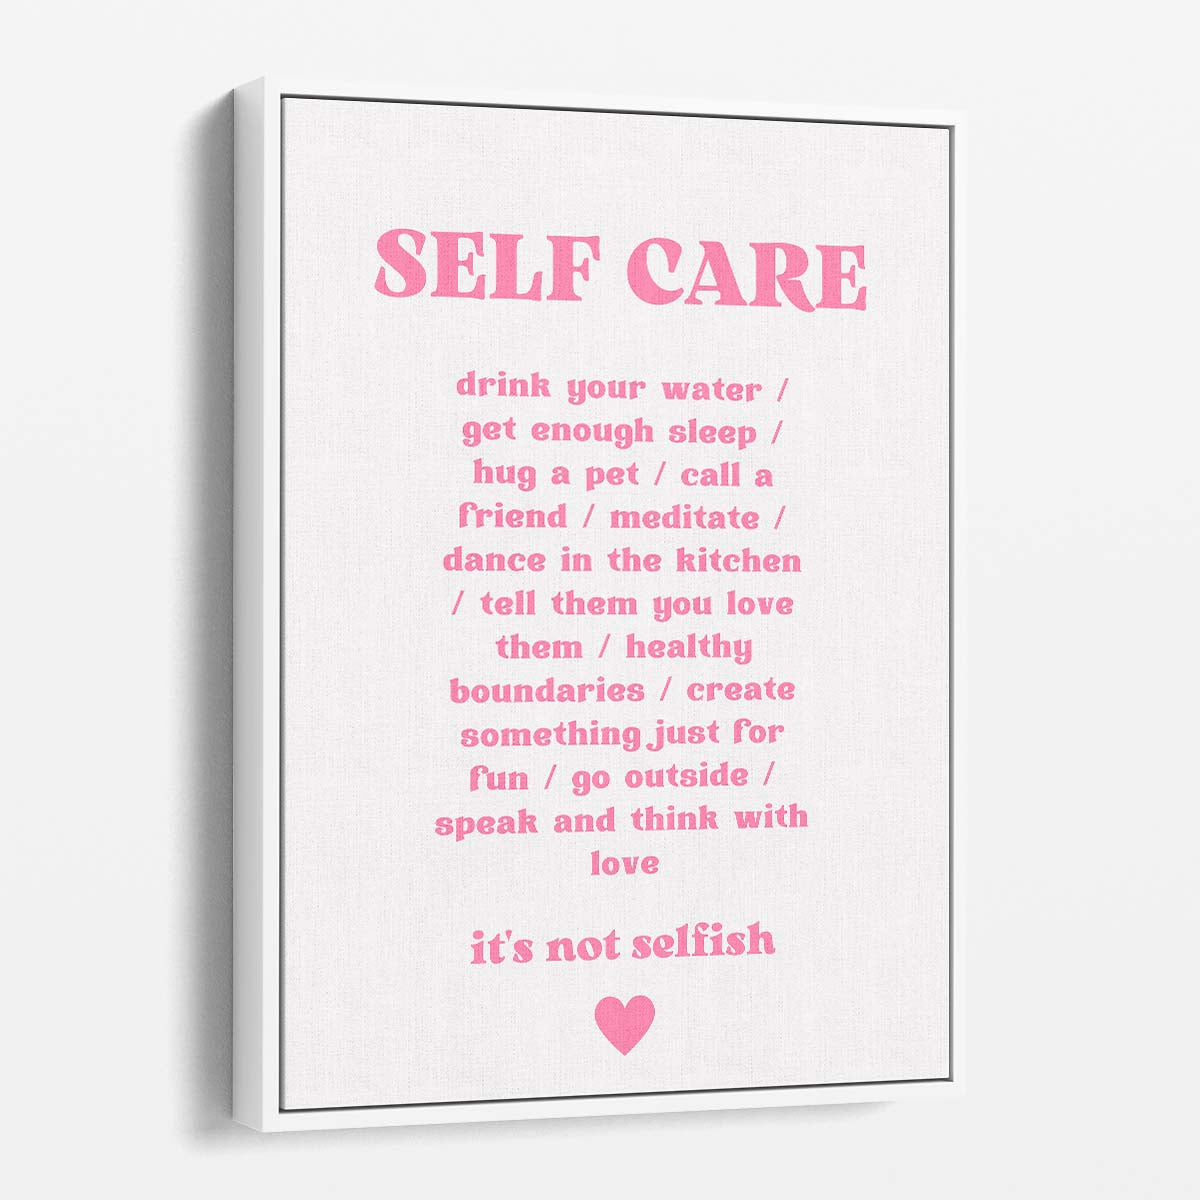 Inspirational Pink Typography Illustration - Self Care Quote by Luxuriance Designs, made in USA